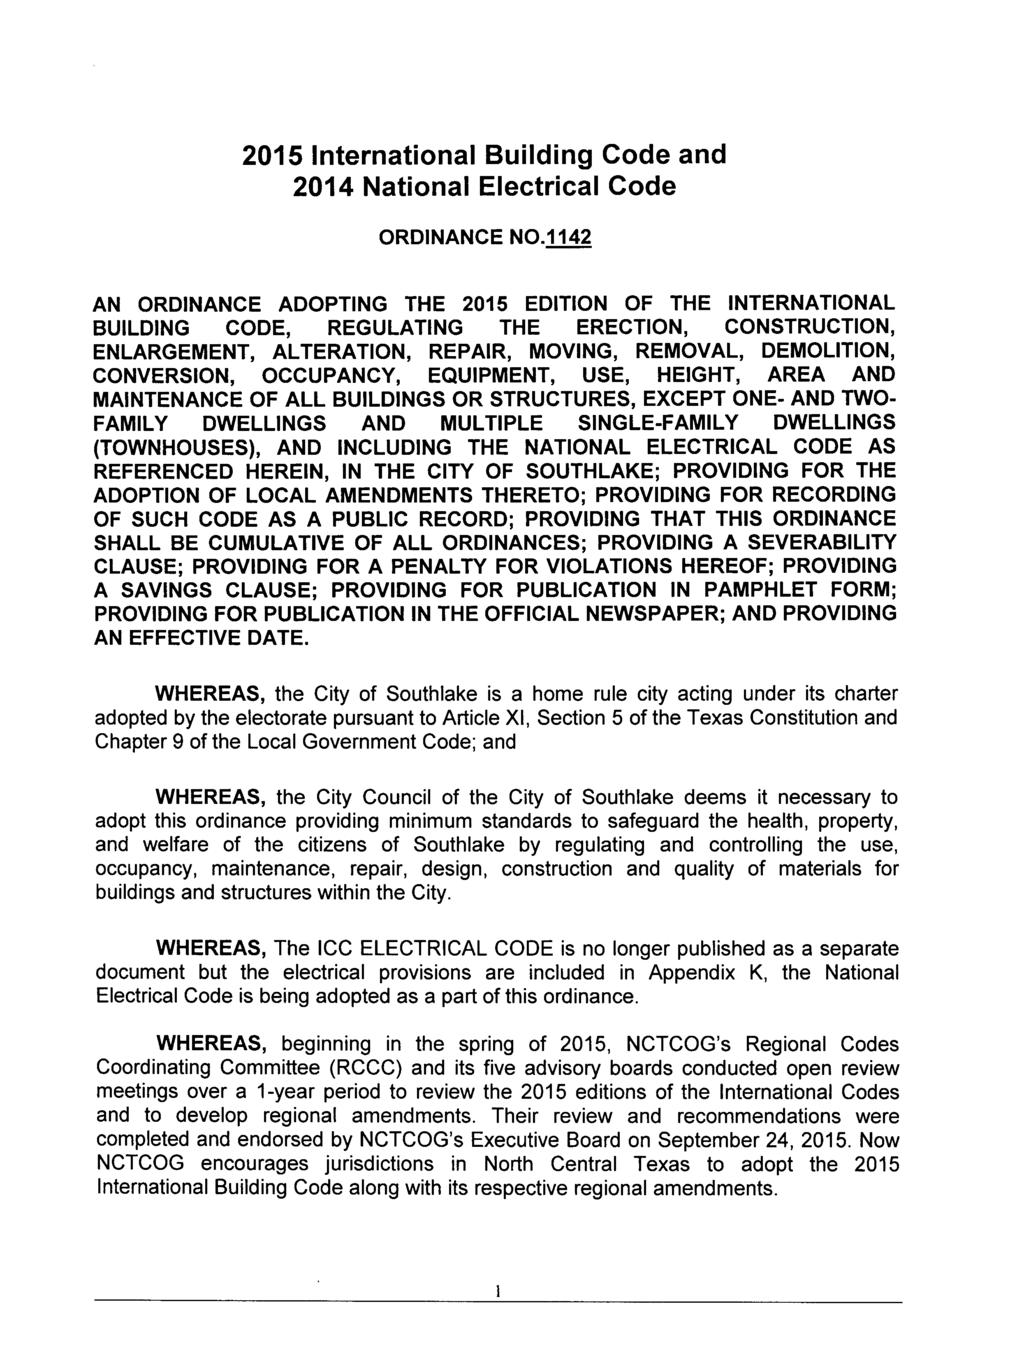 2015 International Building Code and 2014 National Electrical Code ORDINANCE NO 1142 AN ORDINANCE ADOPTING THE 2015 EDITION OF THE INTERNATIONAL BUILDING CODE REGULATING THE ERECTION CONSTRUCTION